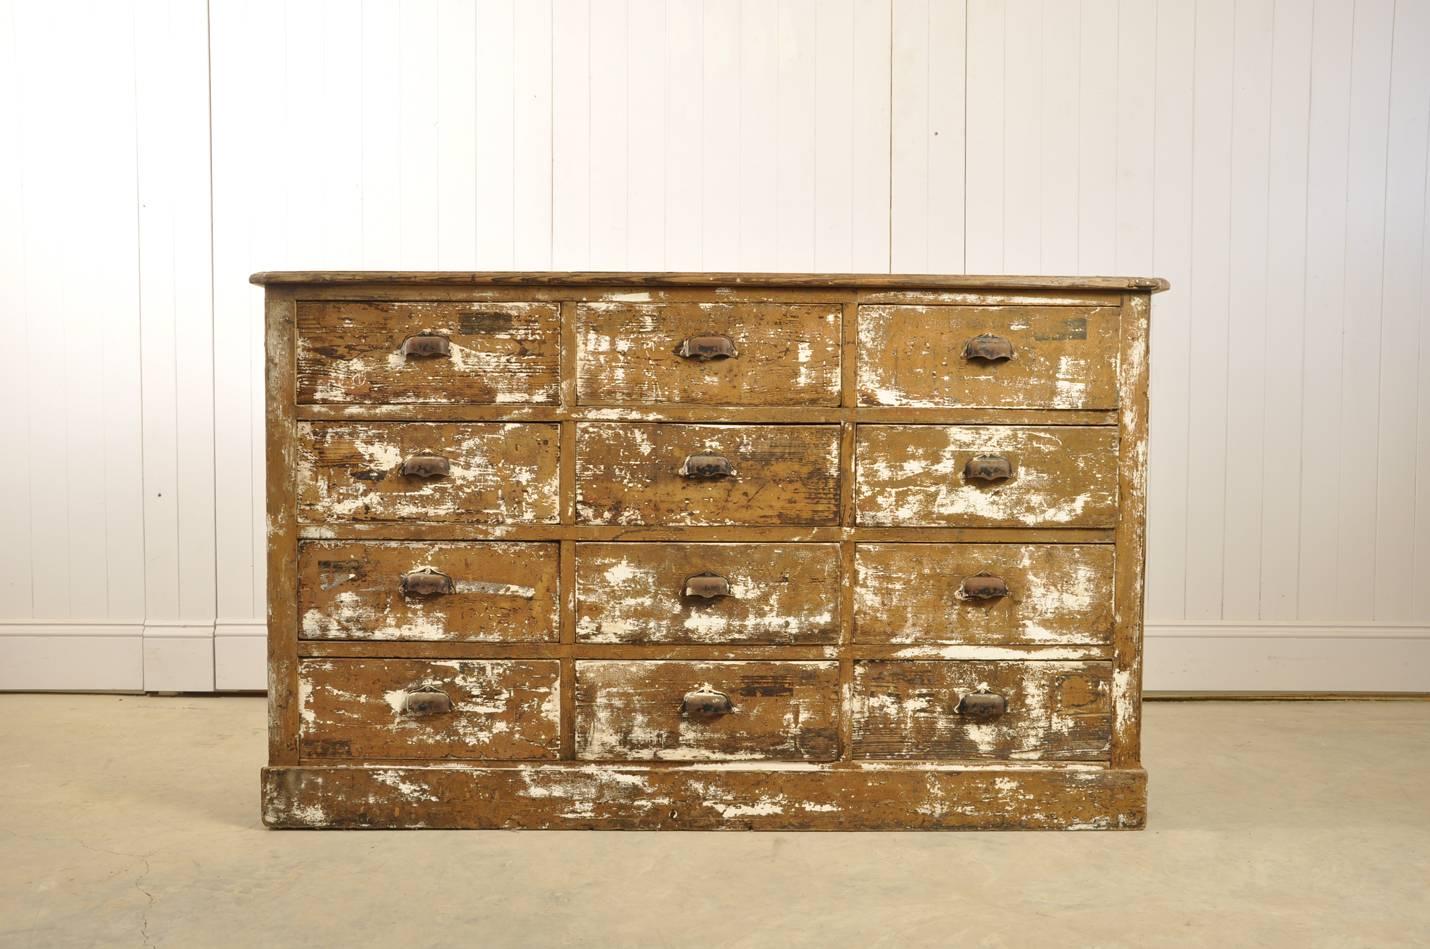 We sourced this vintage chest of drawers in Belgium.  We just loved the look of it, which has been produced by scraping back the layers of paint. 

It has quite a rustic / Industrial feel to it with a few splashes of paint here and there.

Some